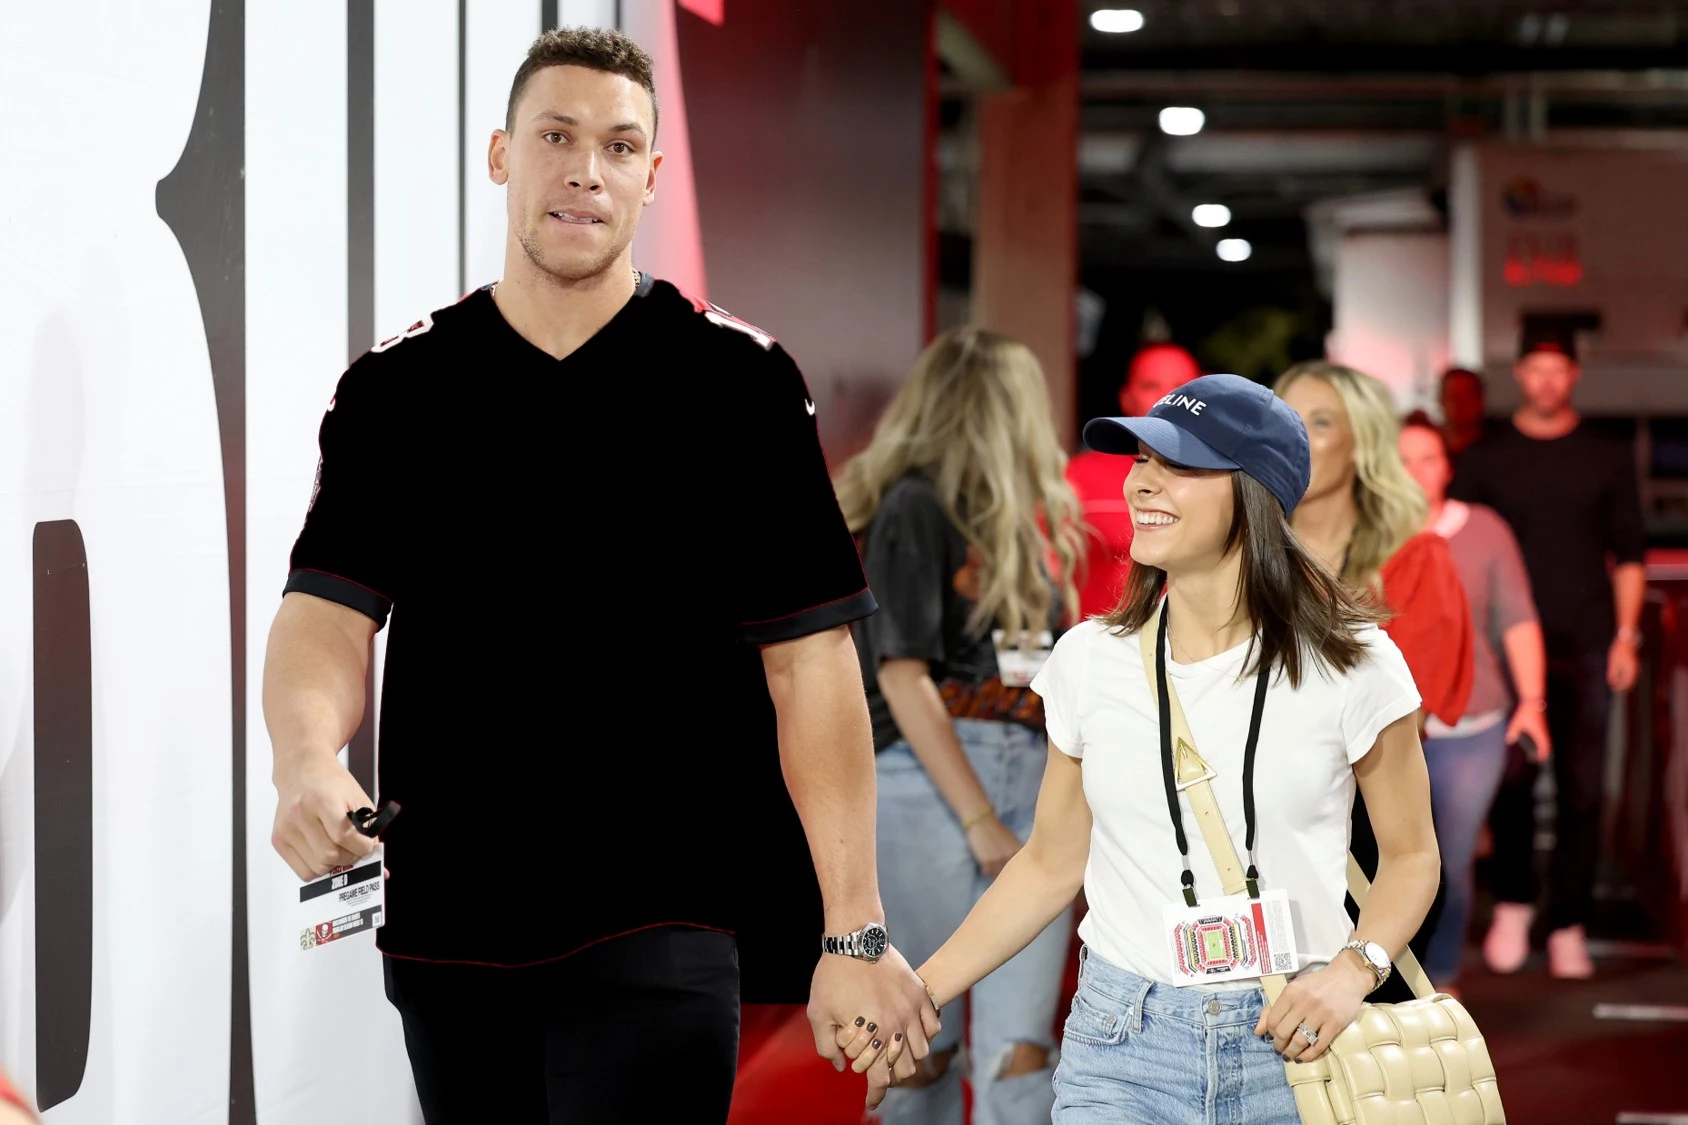 New York Yankees OF Aaron Judge was destined to wear pinstripes